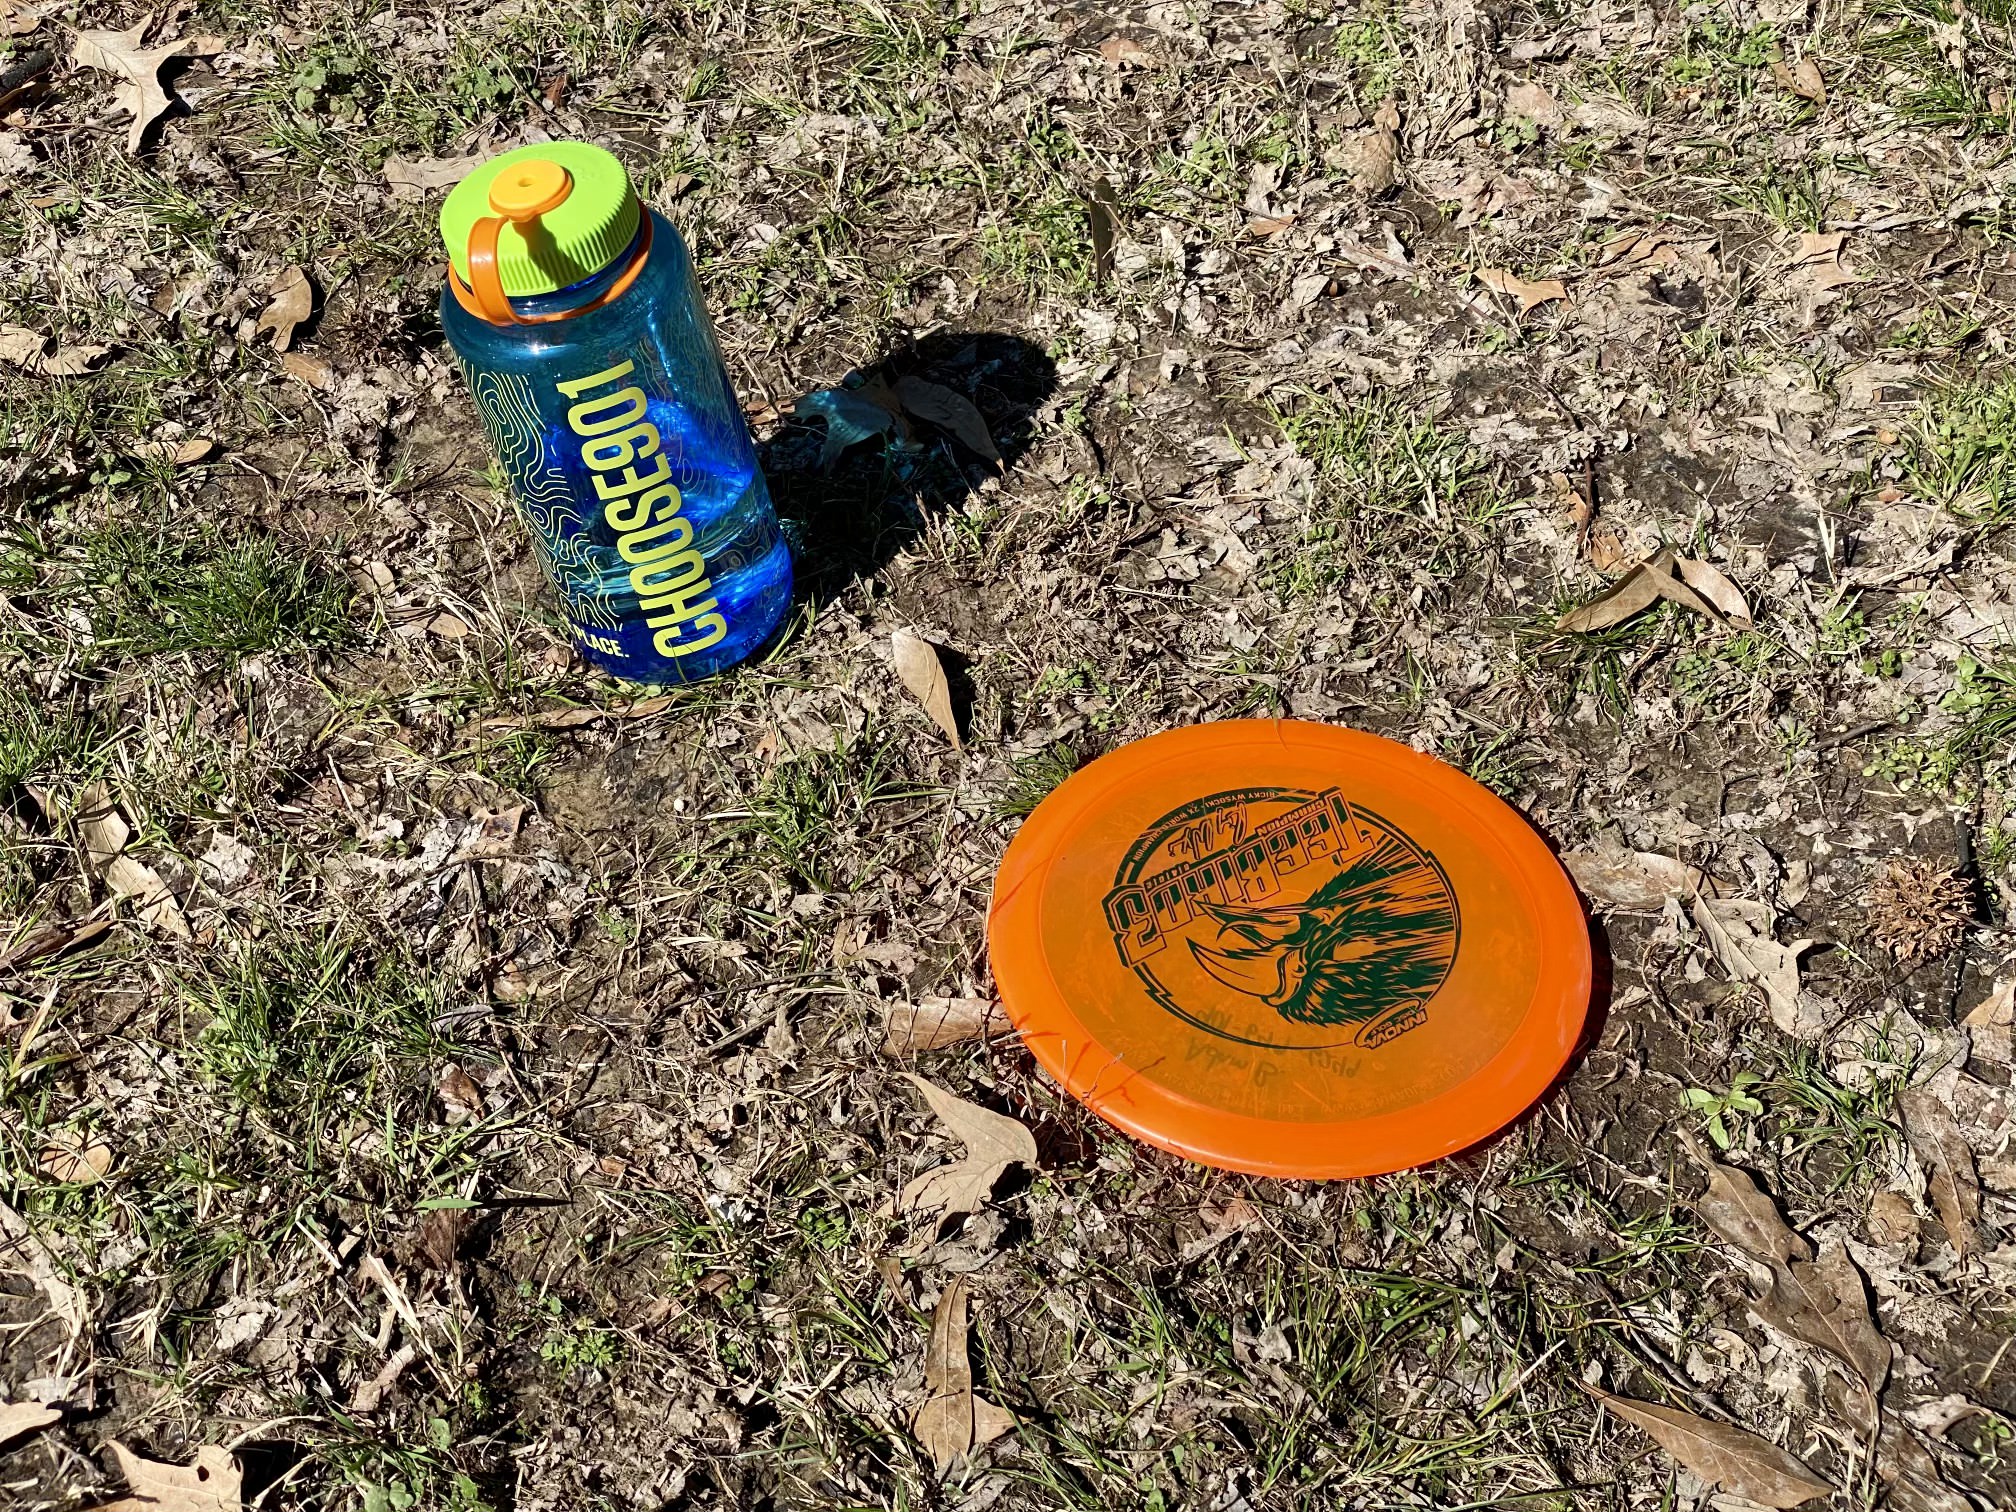 Orange disc and Blue Choose901 water bottle on ground at disc golf course in Memphis.